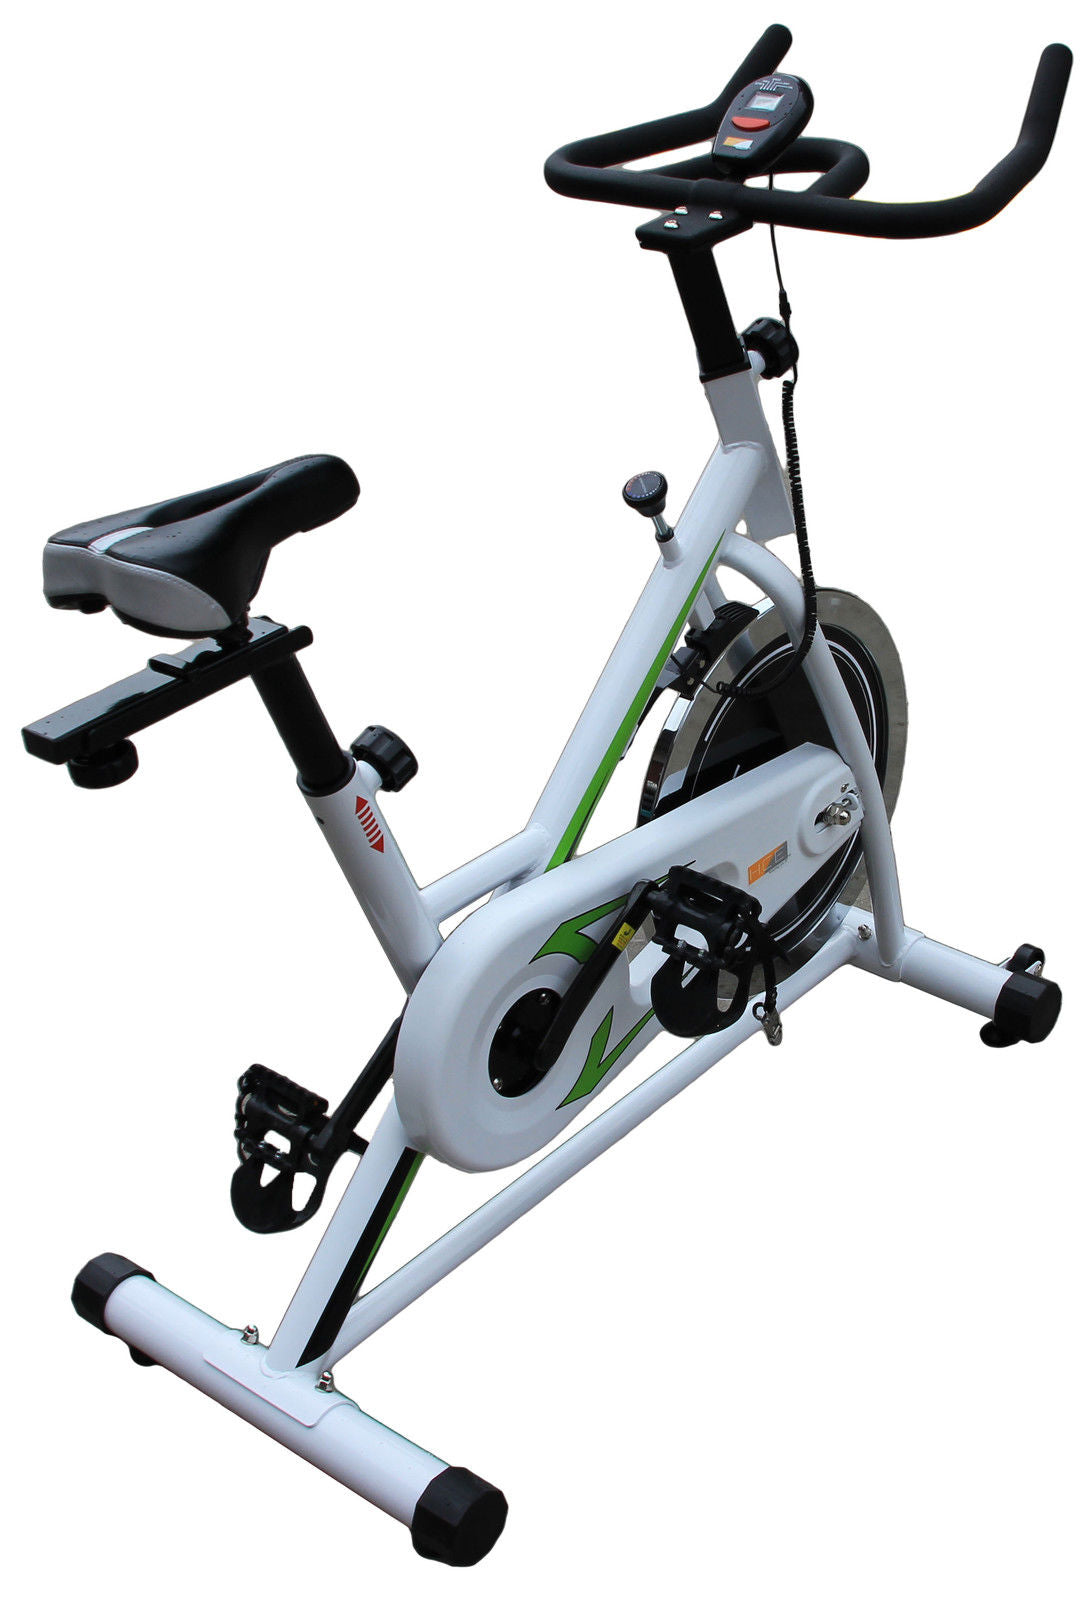 OZ Commercial Spin Flywheel Bike Fully Adjustable For Home Gym Fitness Exercise - iworkout.com.au